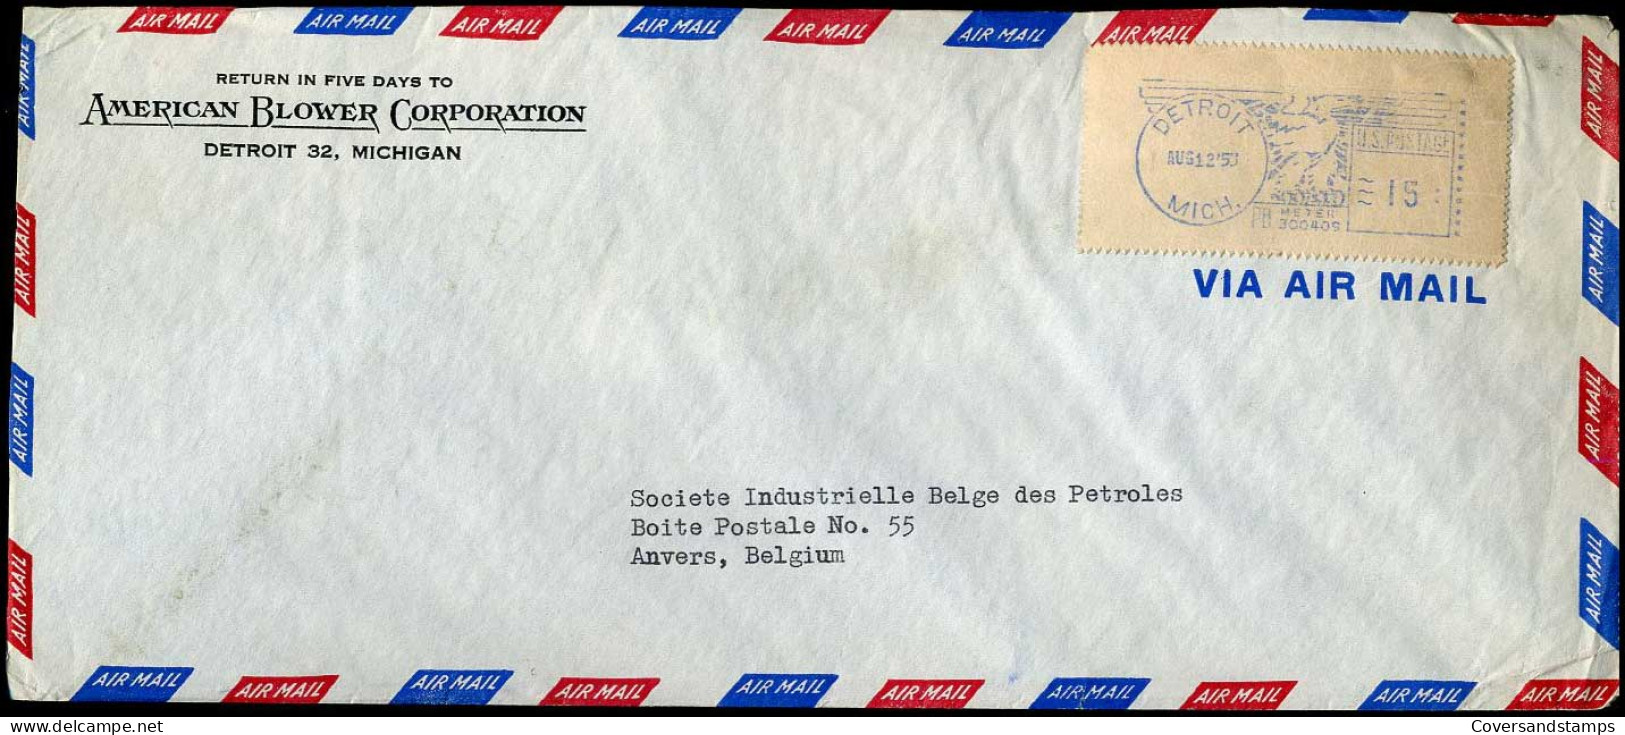 USA - Cover Antwerp, Belgium -- The Belmont Packing  & Rubber Co - Lettres & Documents